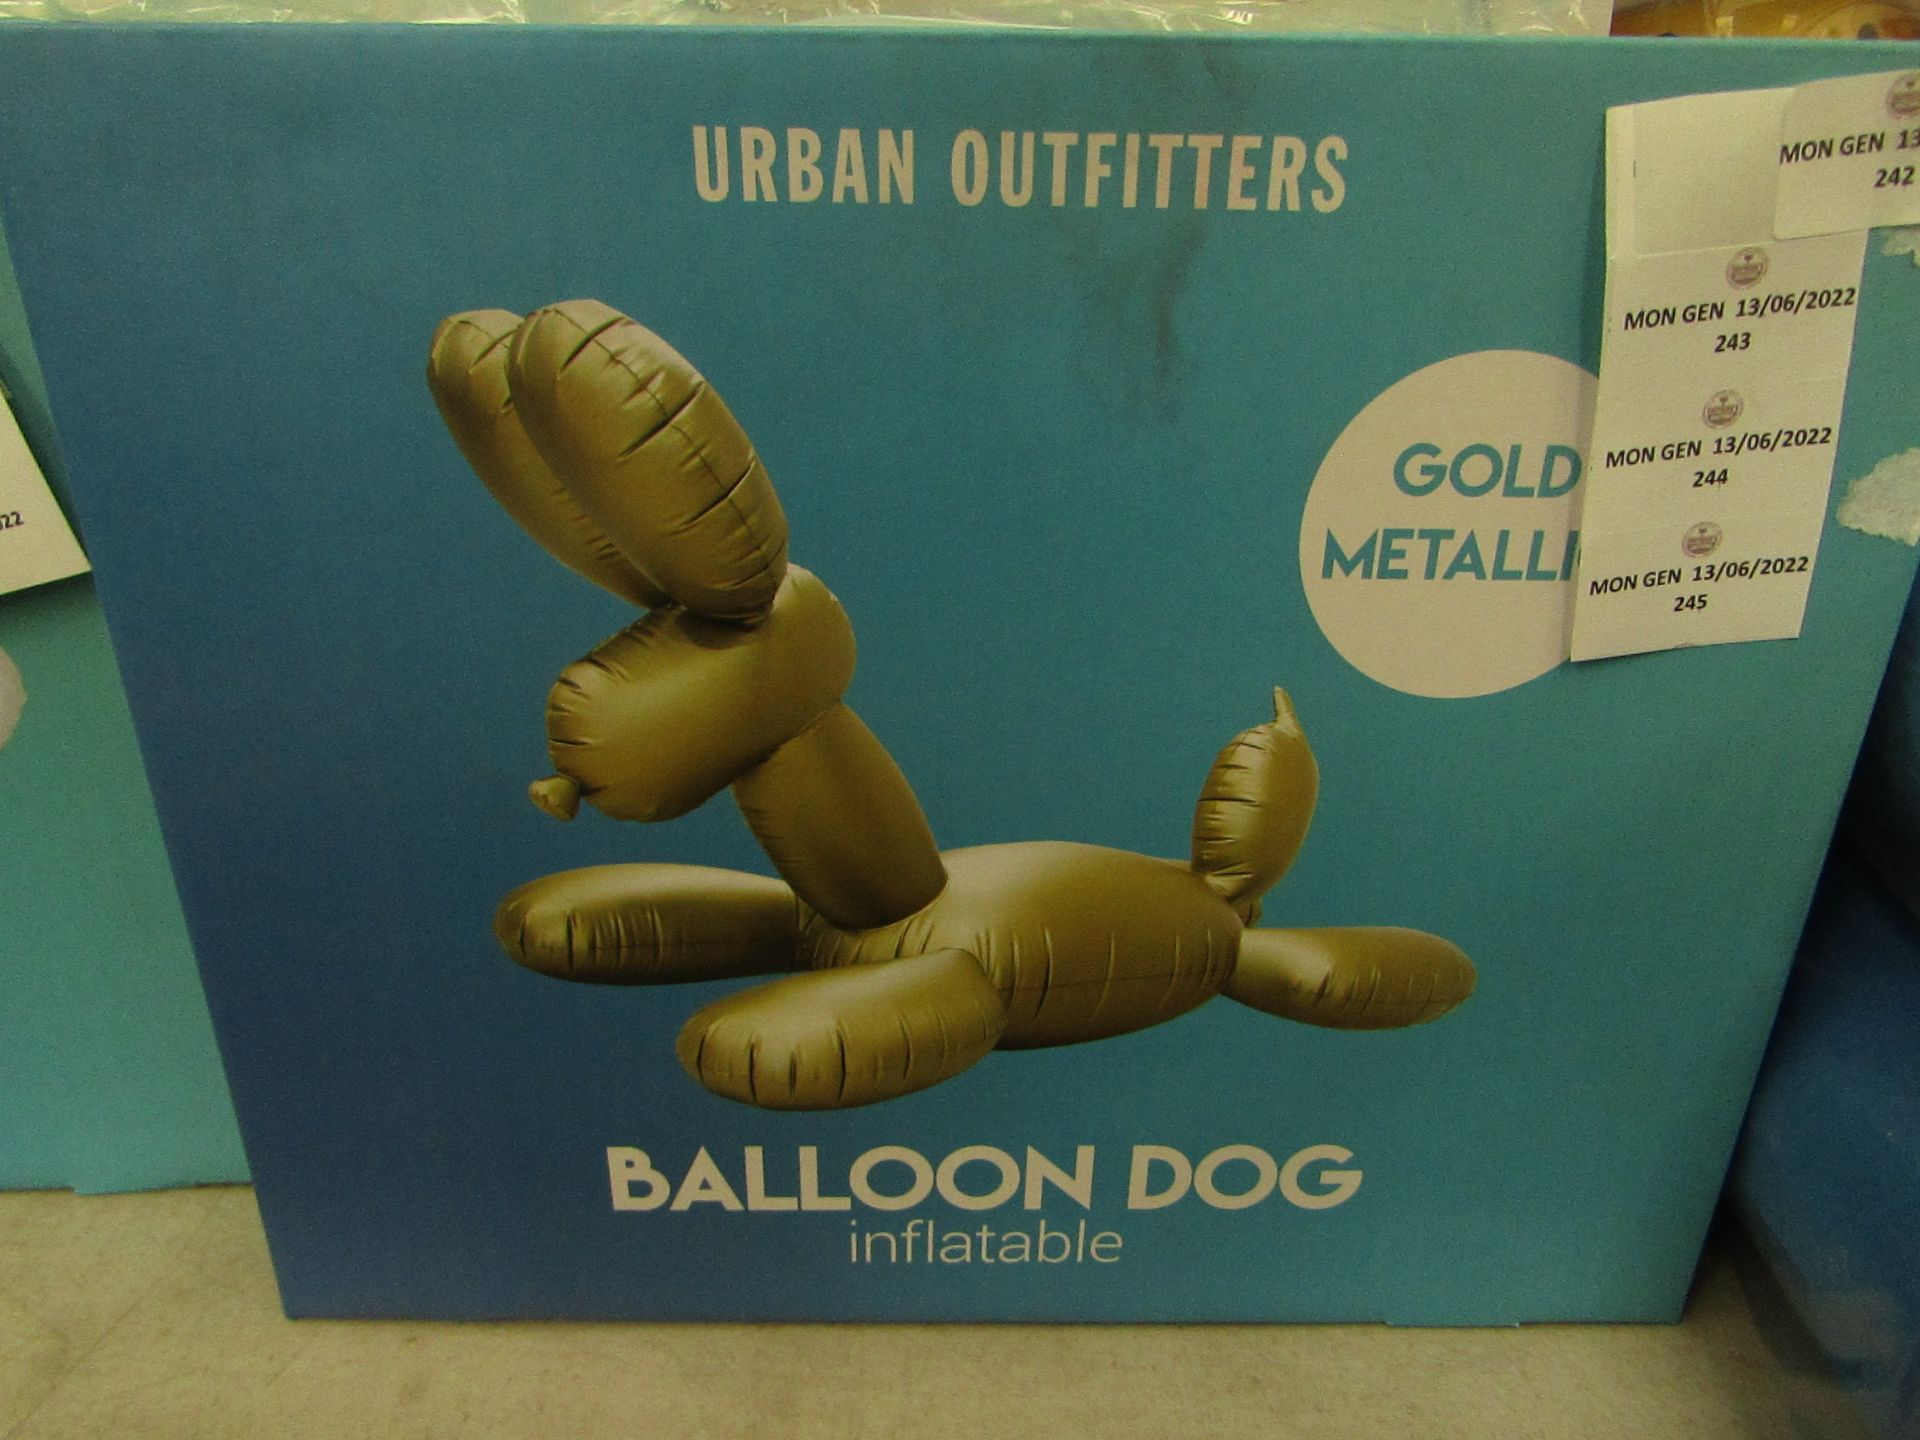 Urban Outfitters - Metallic Gold Inflatable Balloon Dog - New & Boxed. RRP £40.